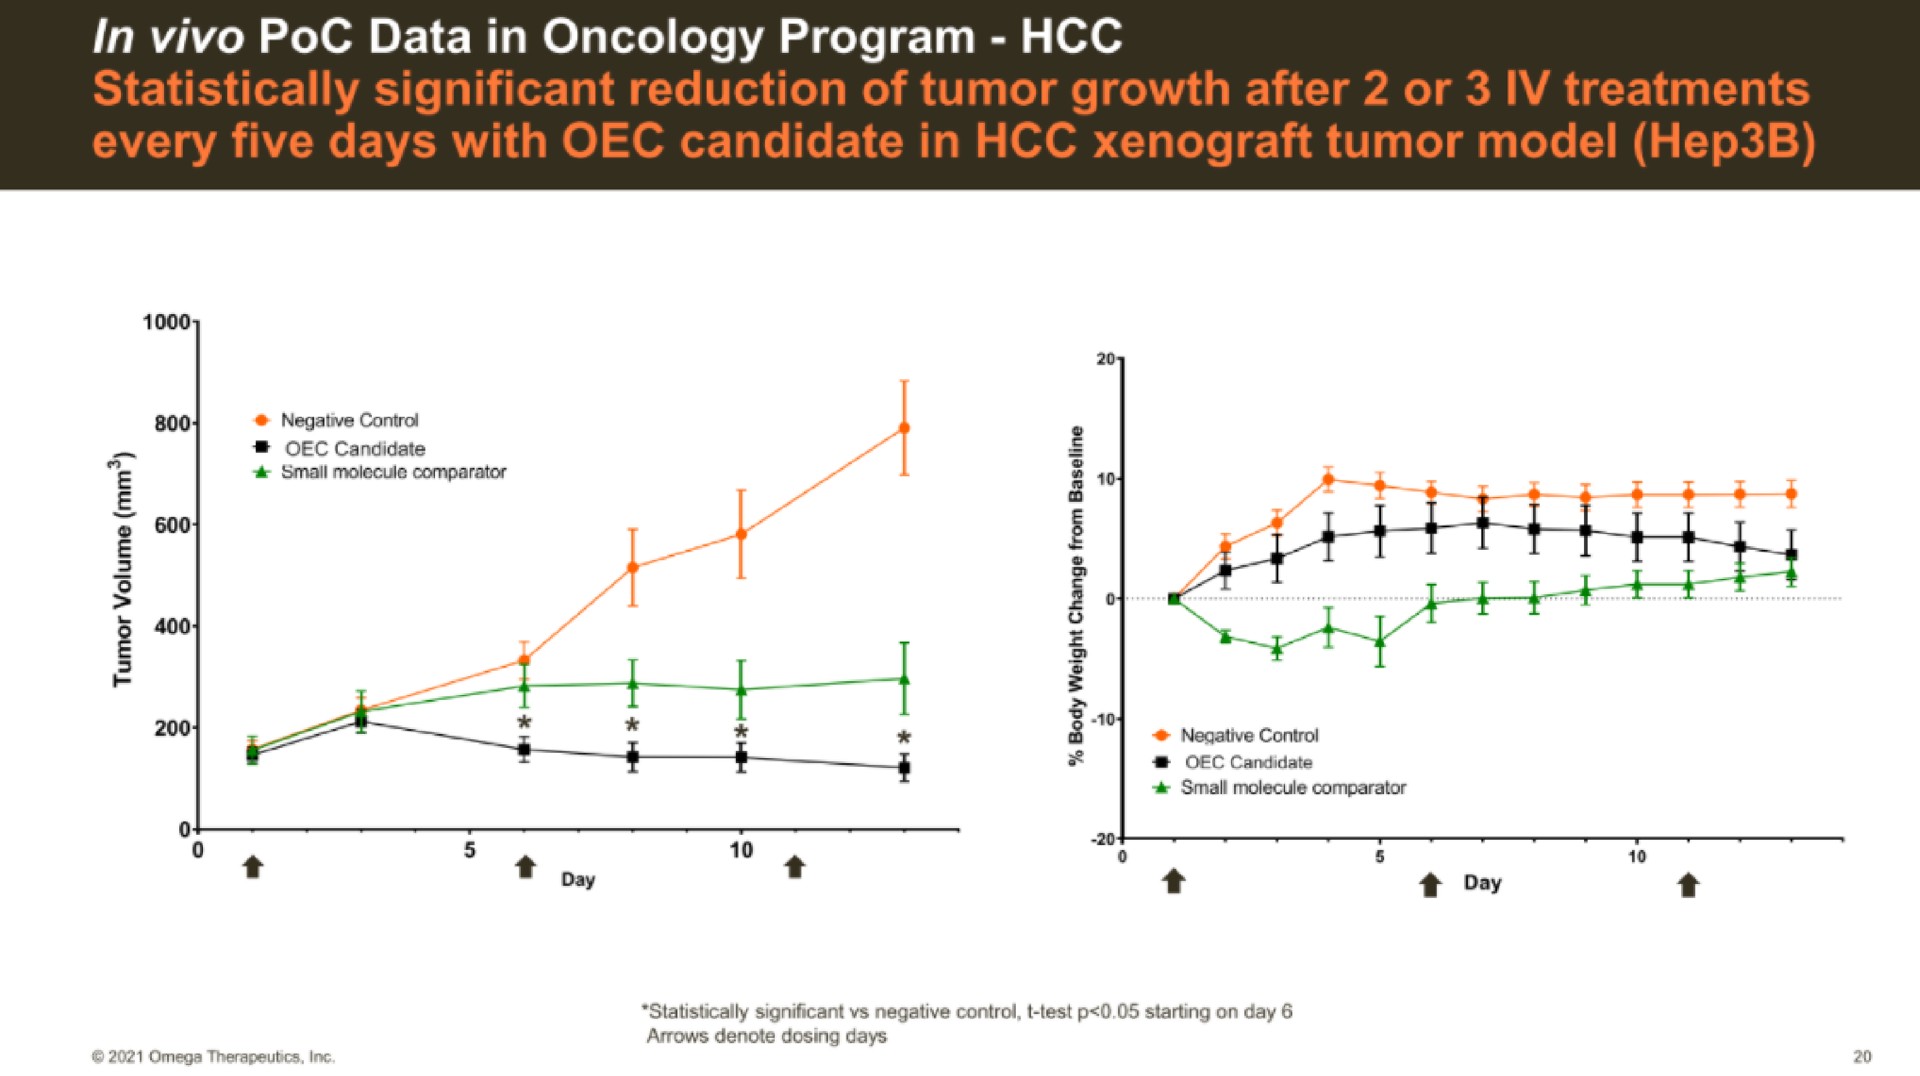 in data in oncology program | Omega Therapeutics